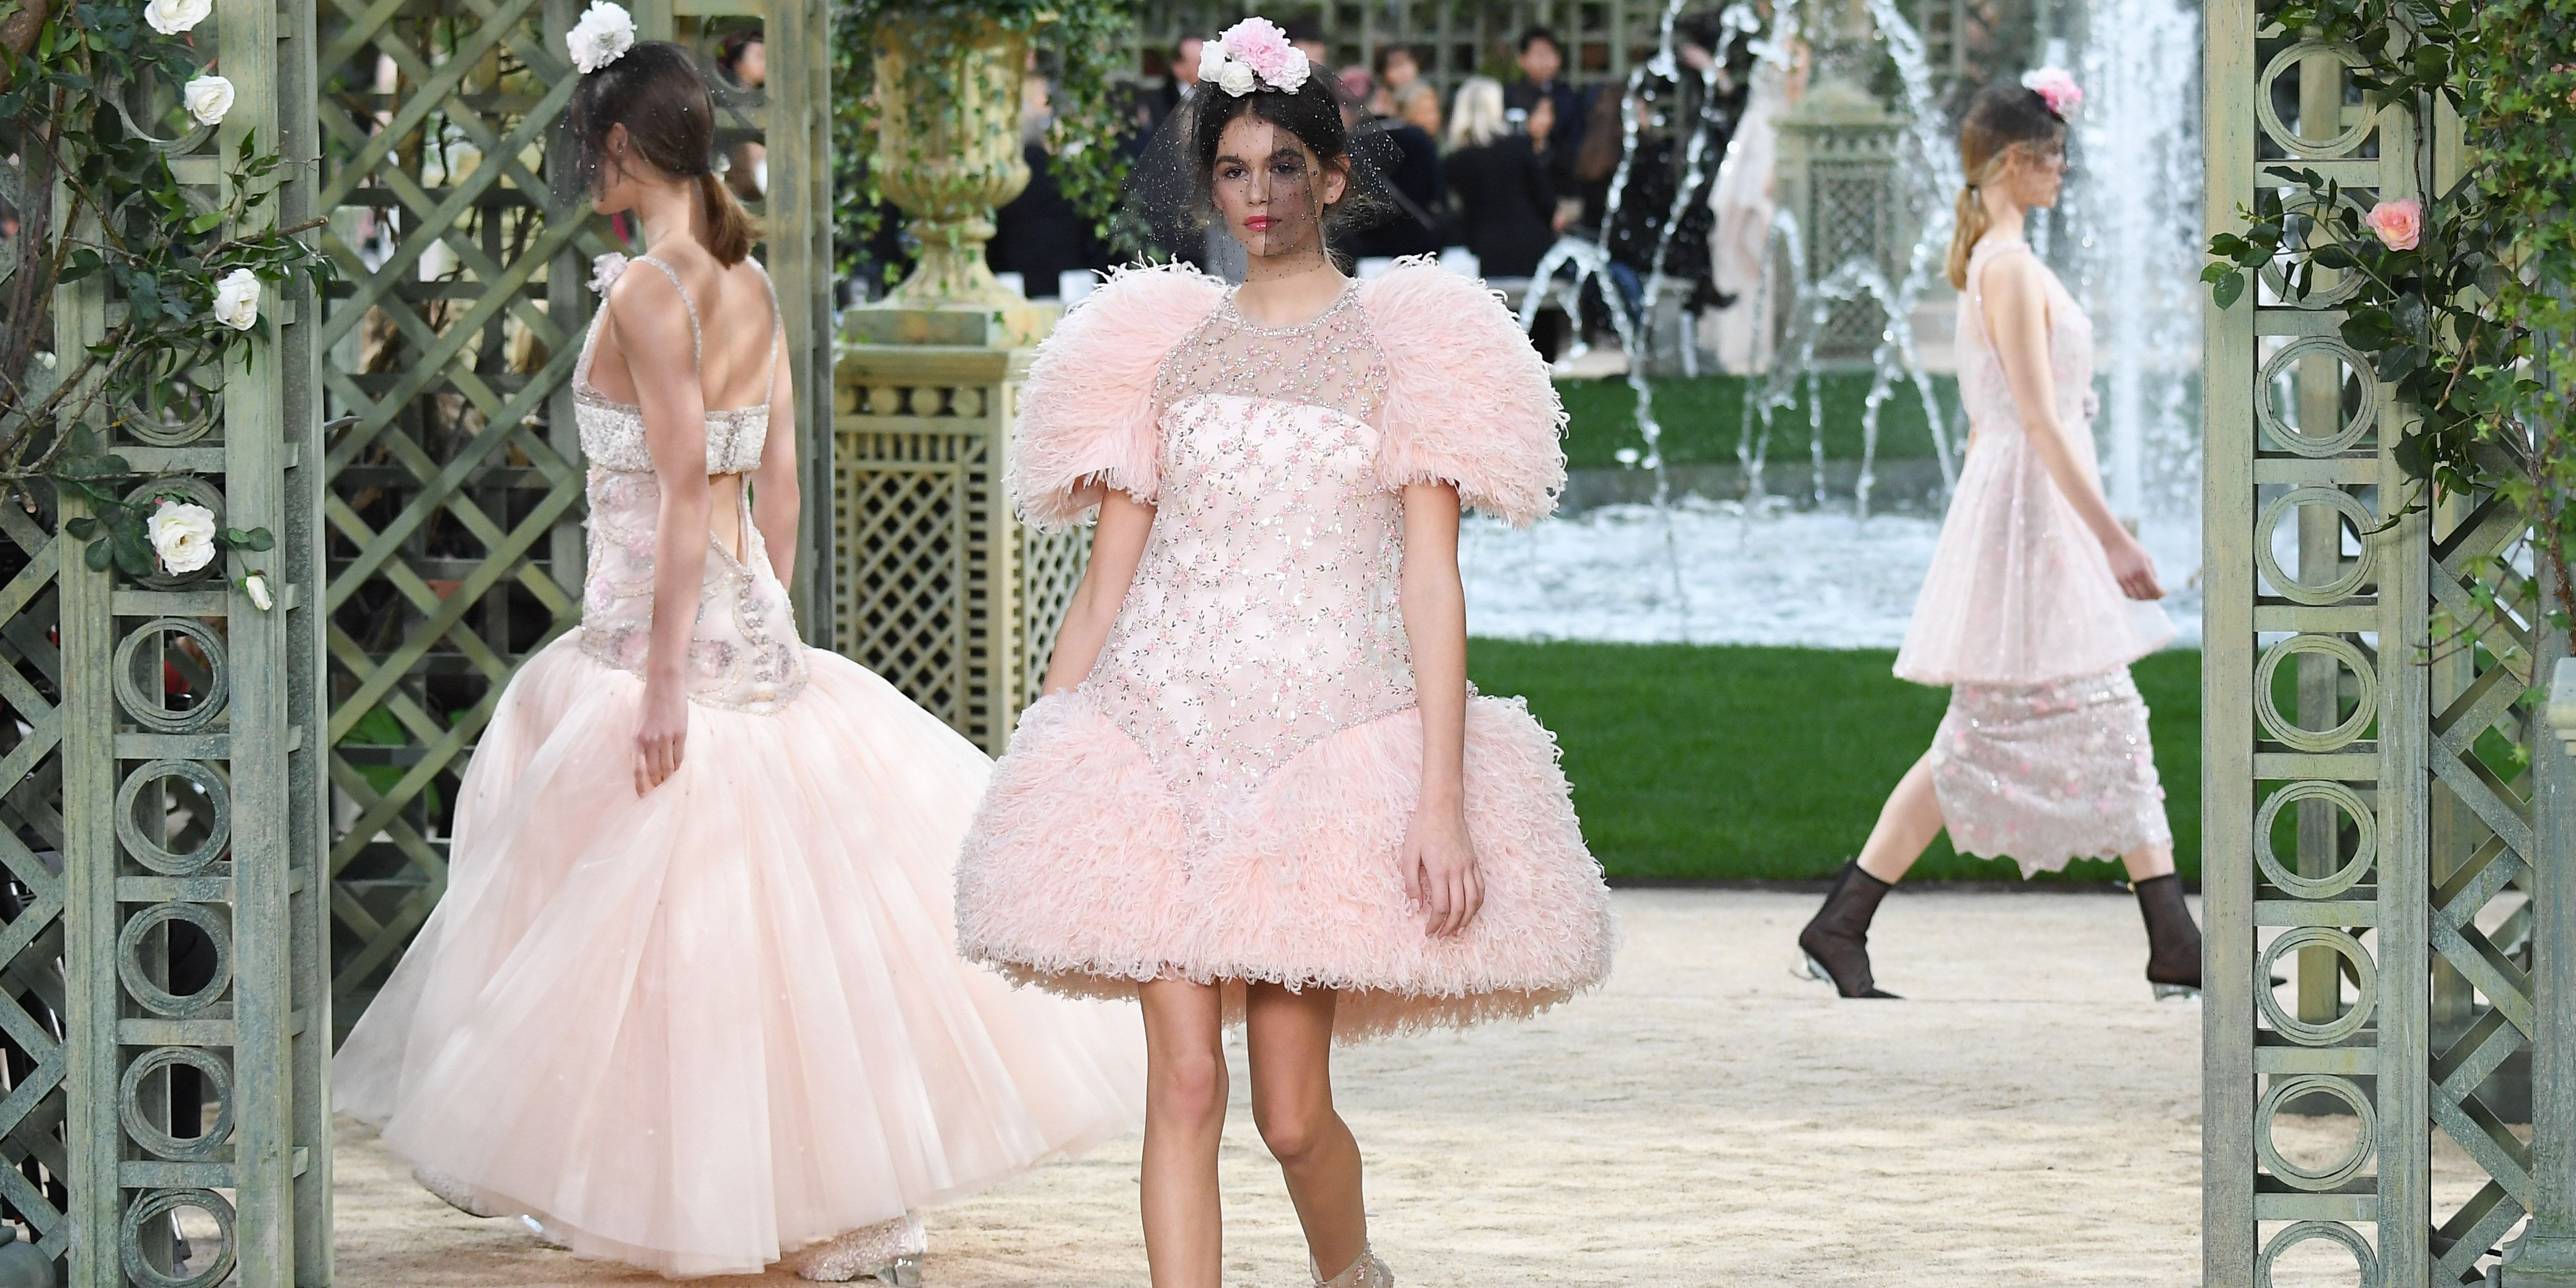 Kaia Gerber Walks First Couture Show at Chanel Couture Spring 2018 - Chanel  Couture Spring 2018 Show Paris